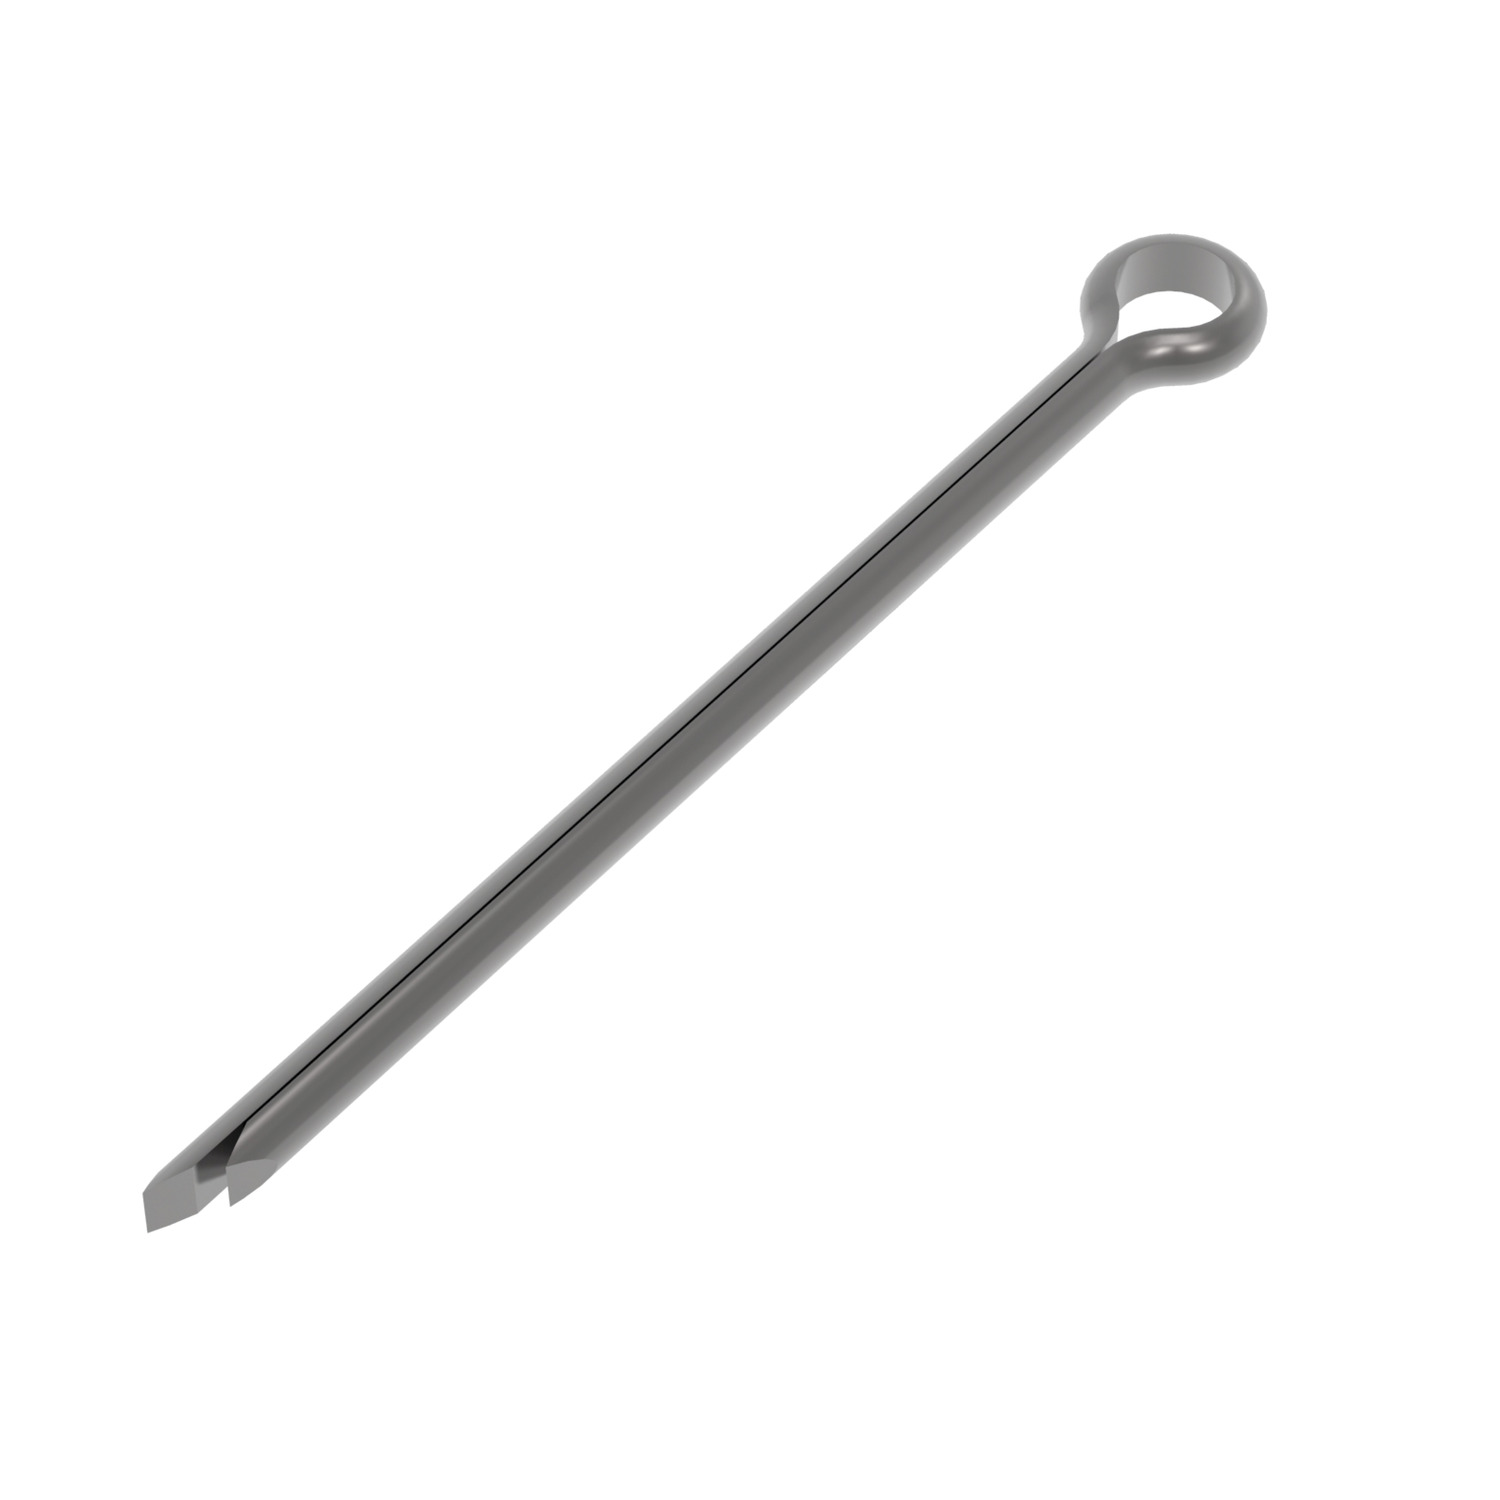 P1240 Steel Cotter Pins